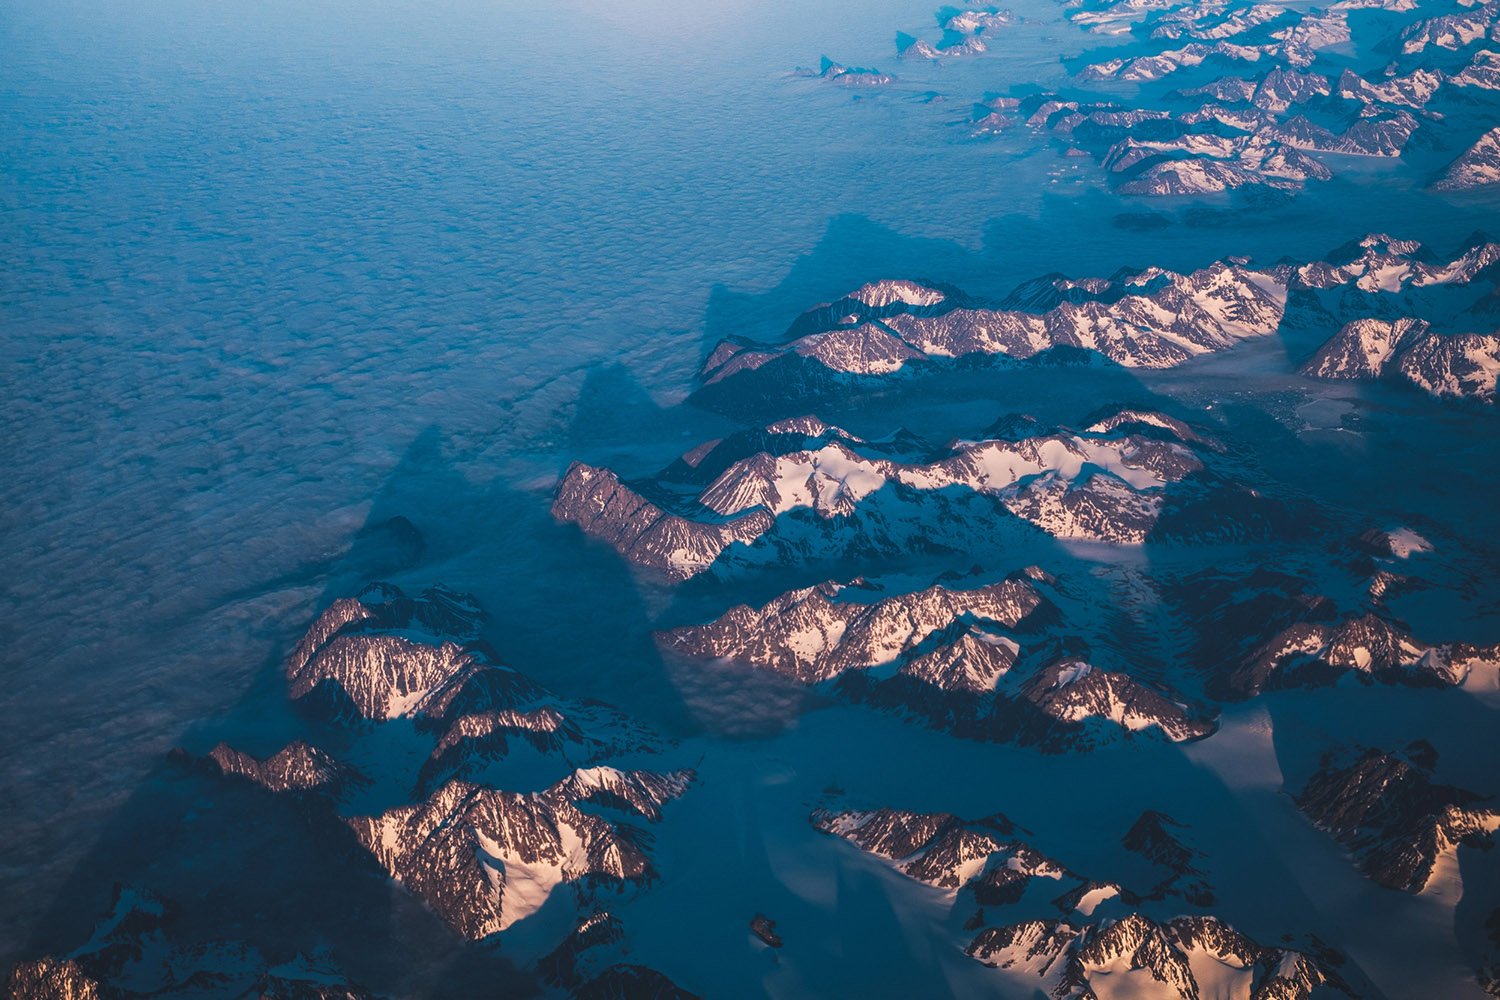 Flying over the East Coast of Greenland